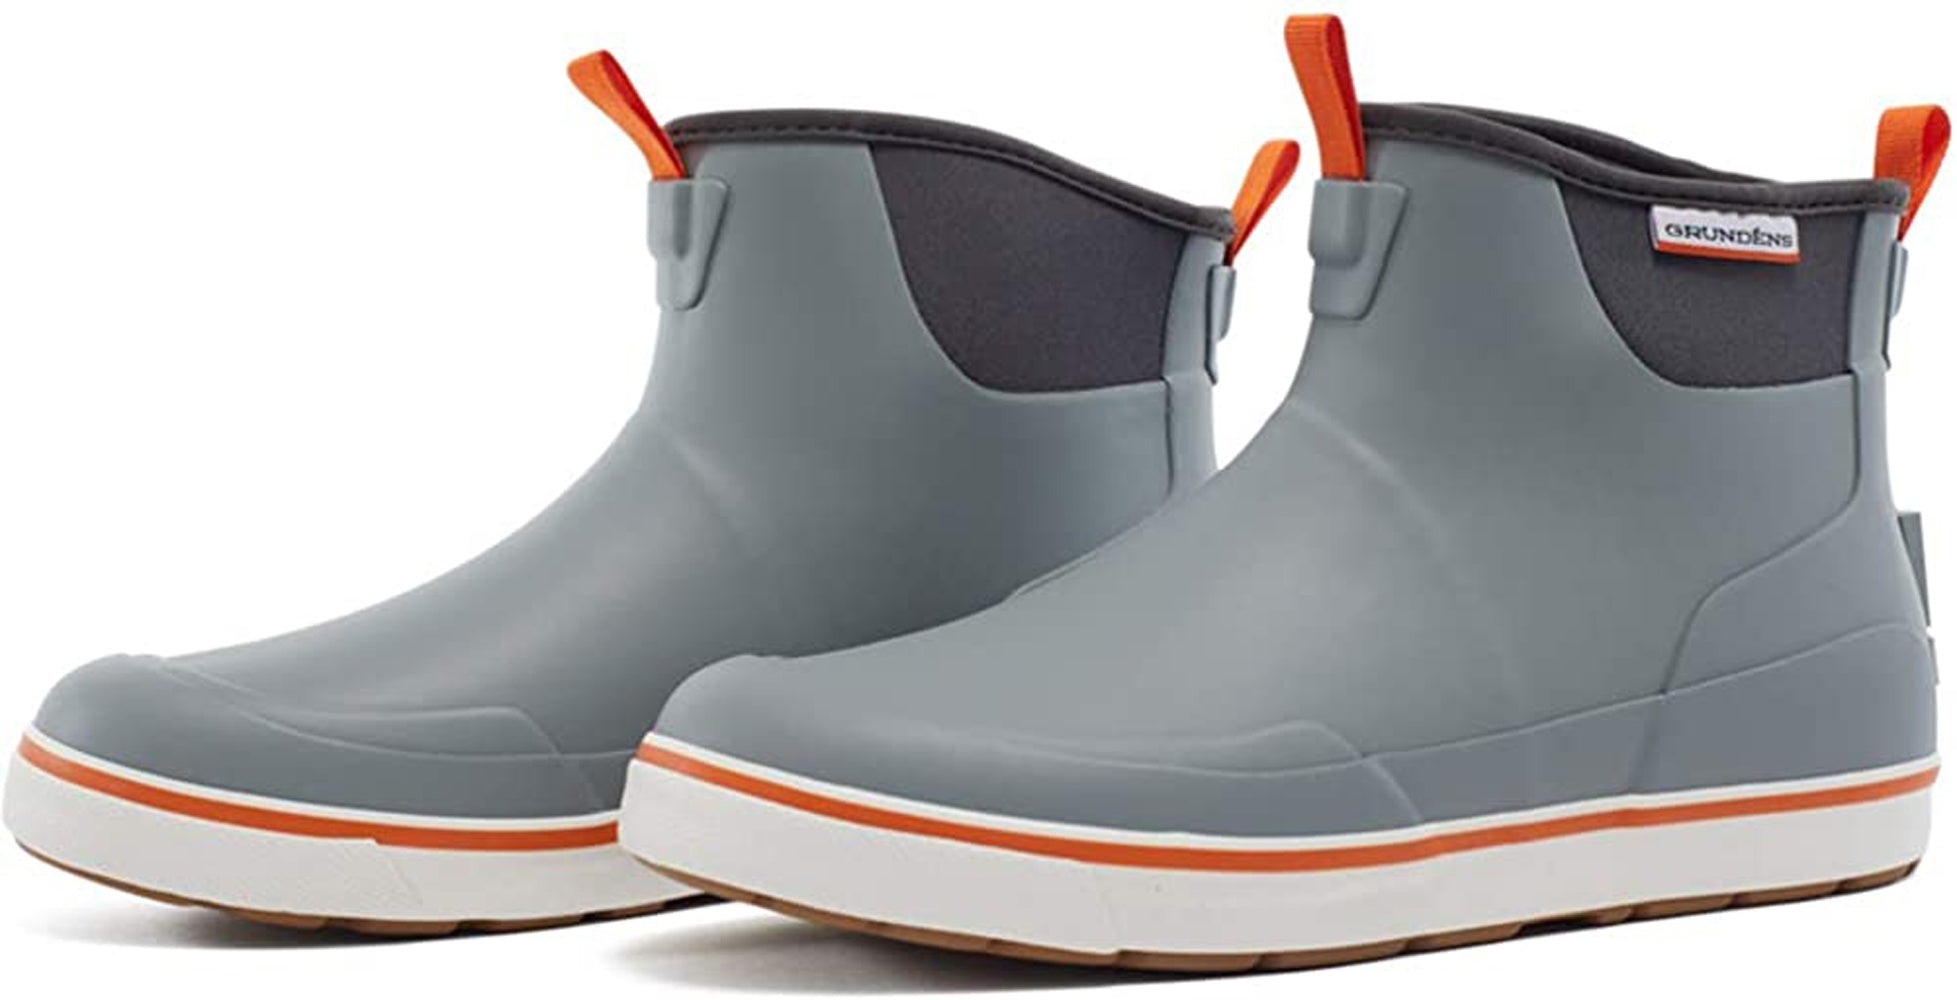 Deck-Boss Ankle Boot in Monument Grey color